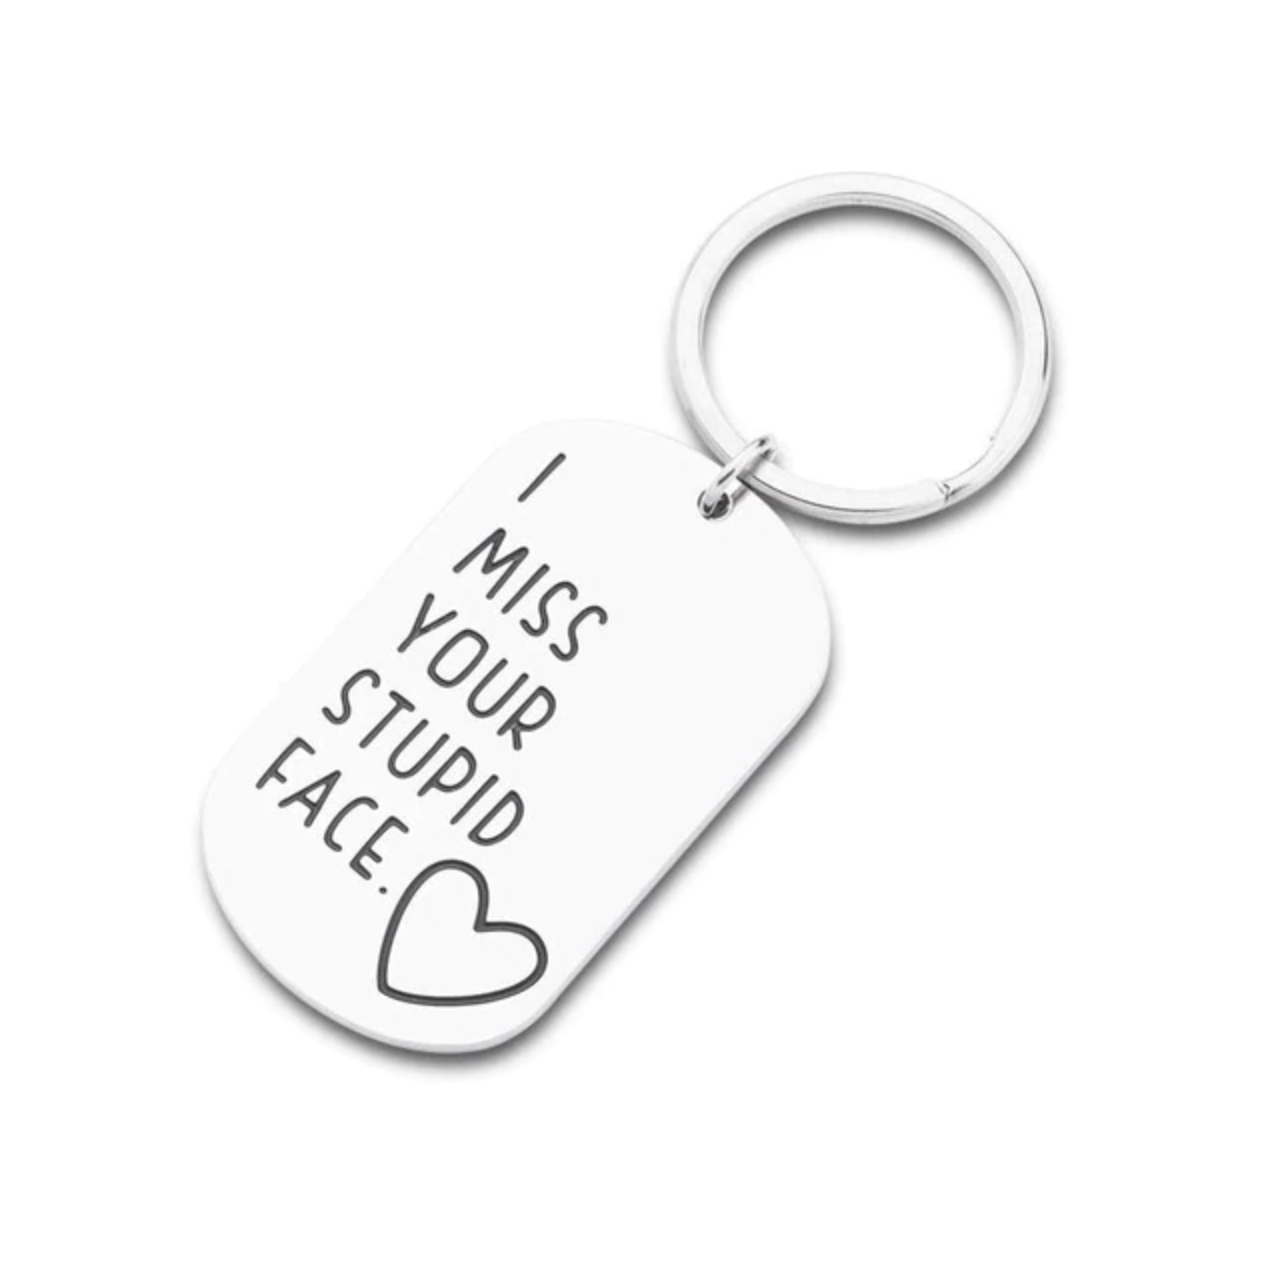 Miss your stupid face key chain / ring